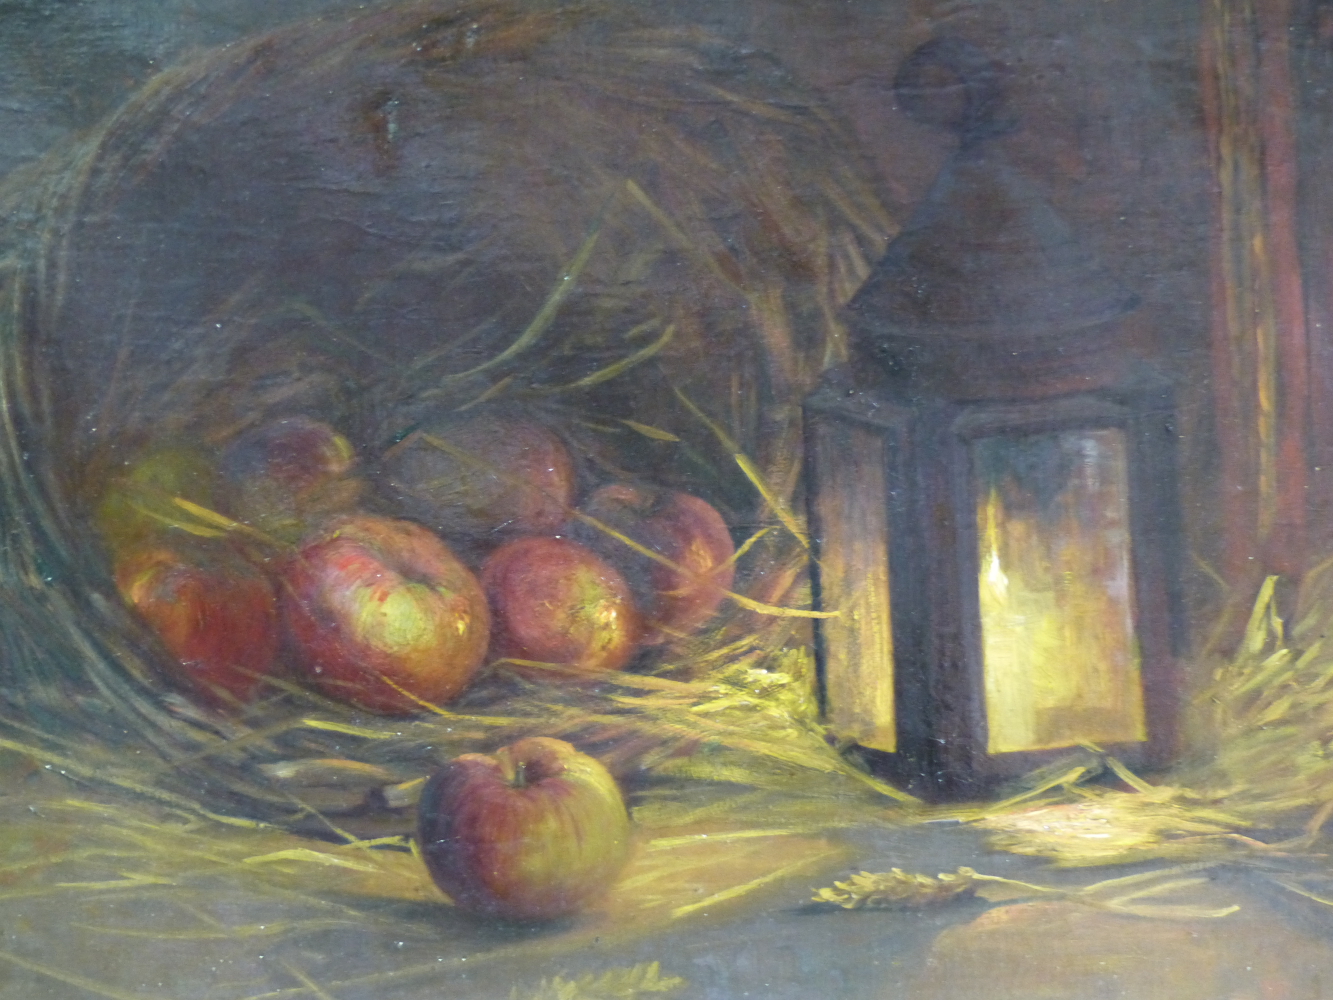 STILL LIFE OF FRUIT AND LANTERN, OIL ON CANVAS, 54.5 X 74.5CM.